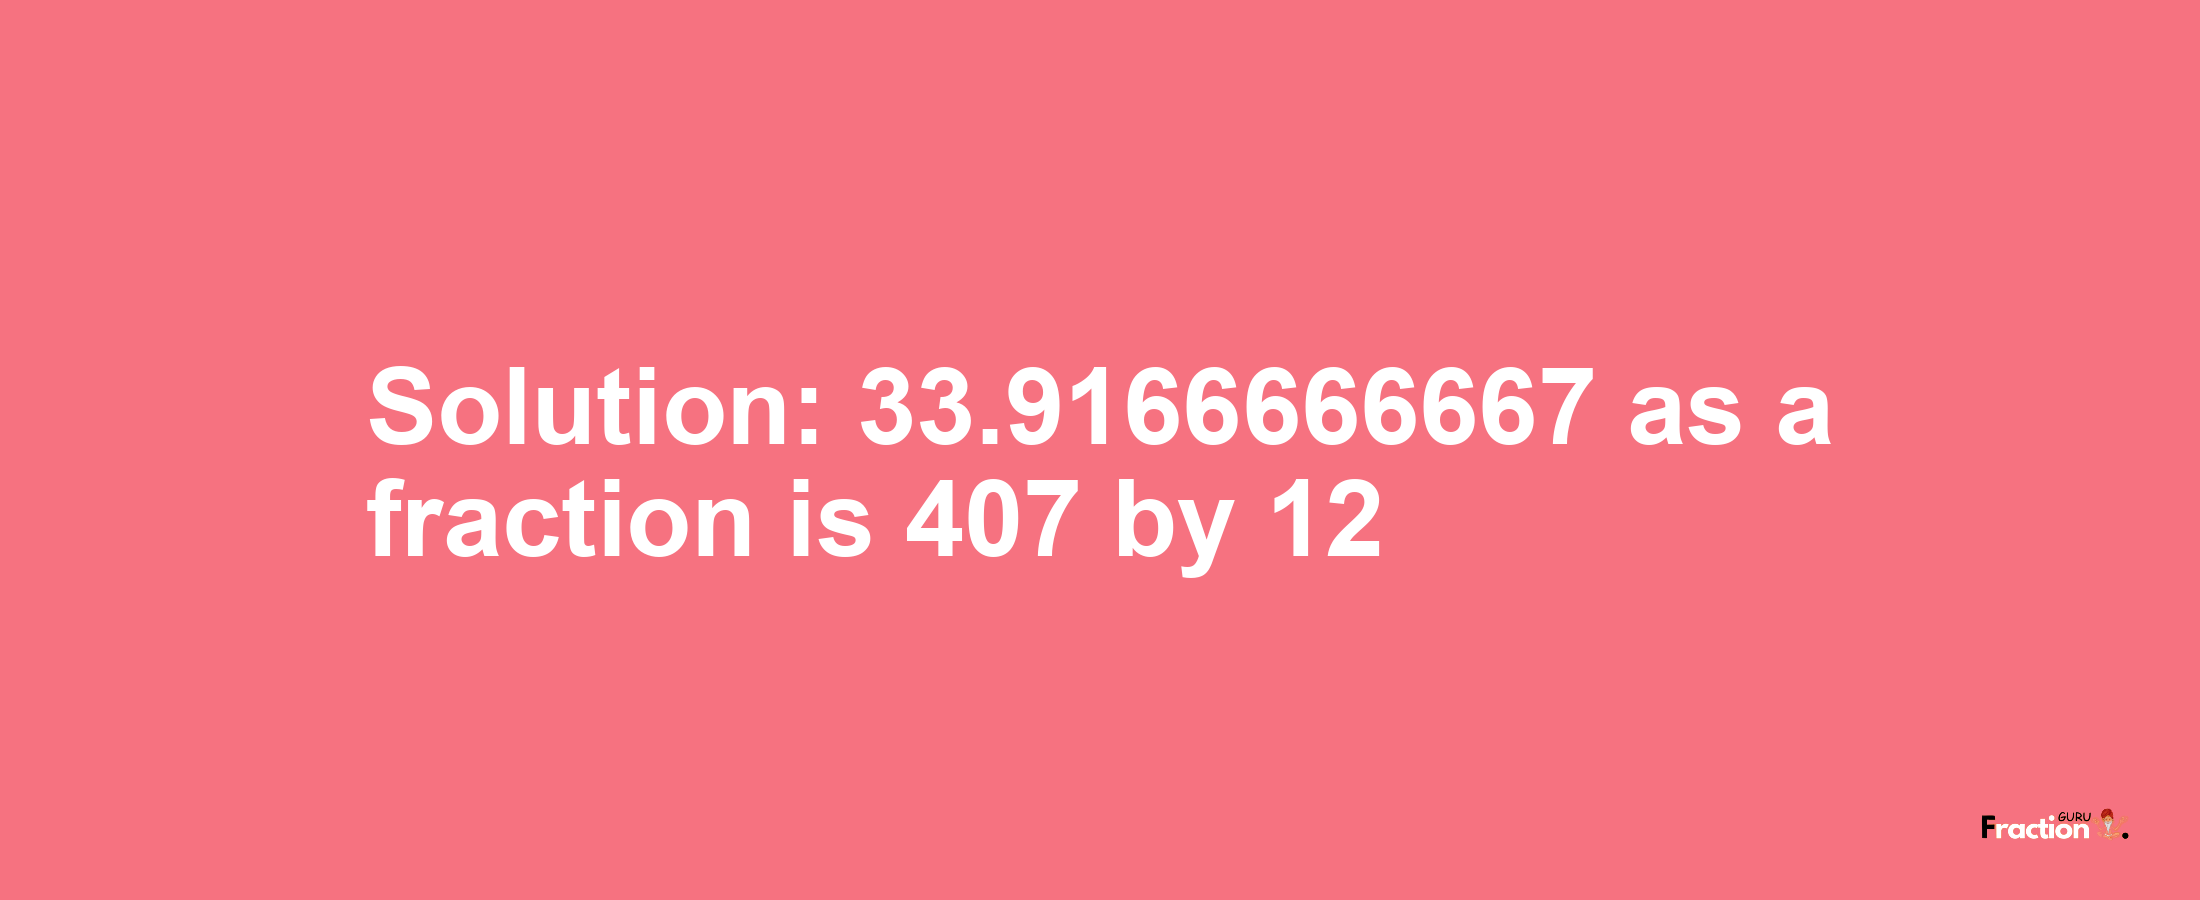 Solution:33.9166666667 as a fraction is 407/12